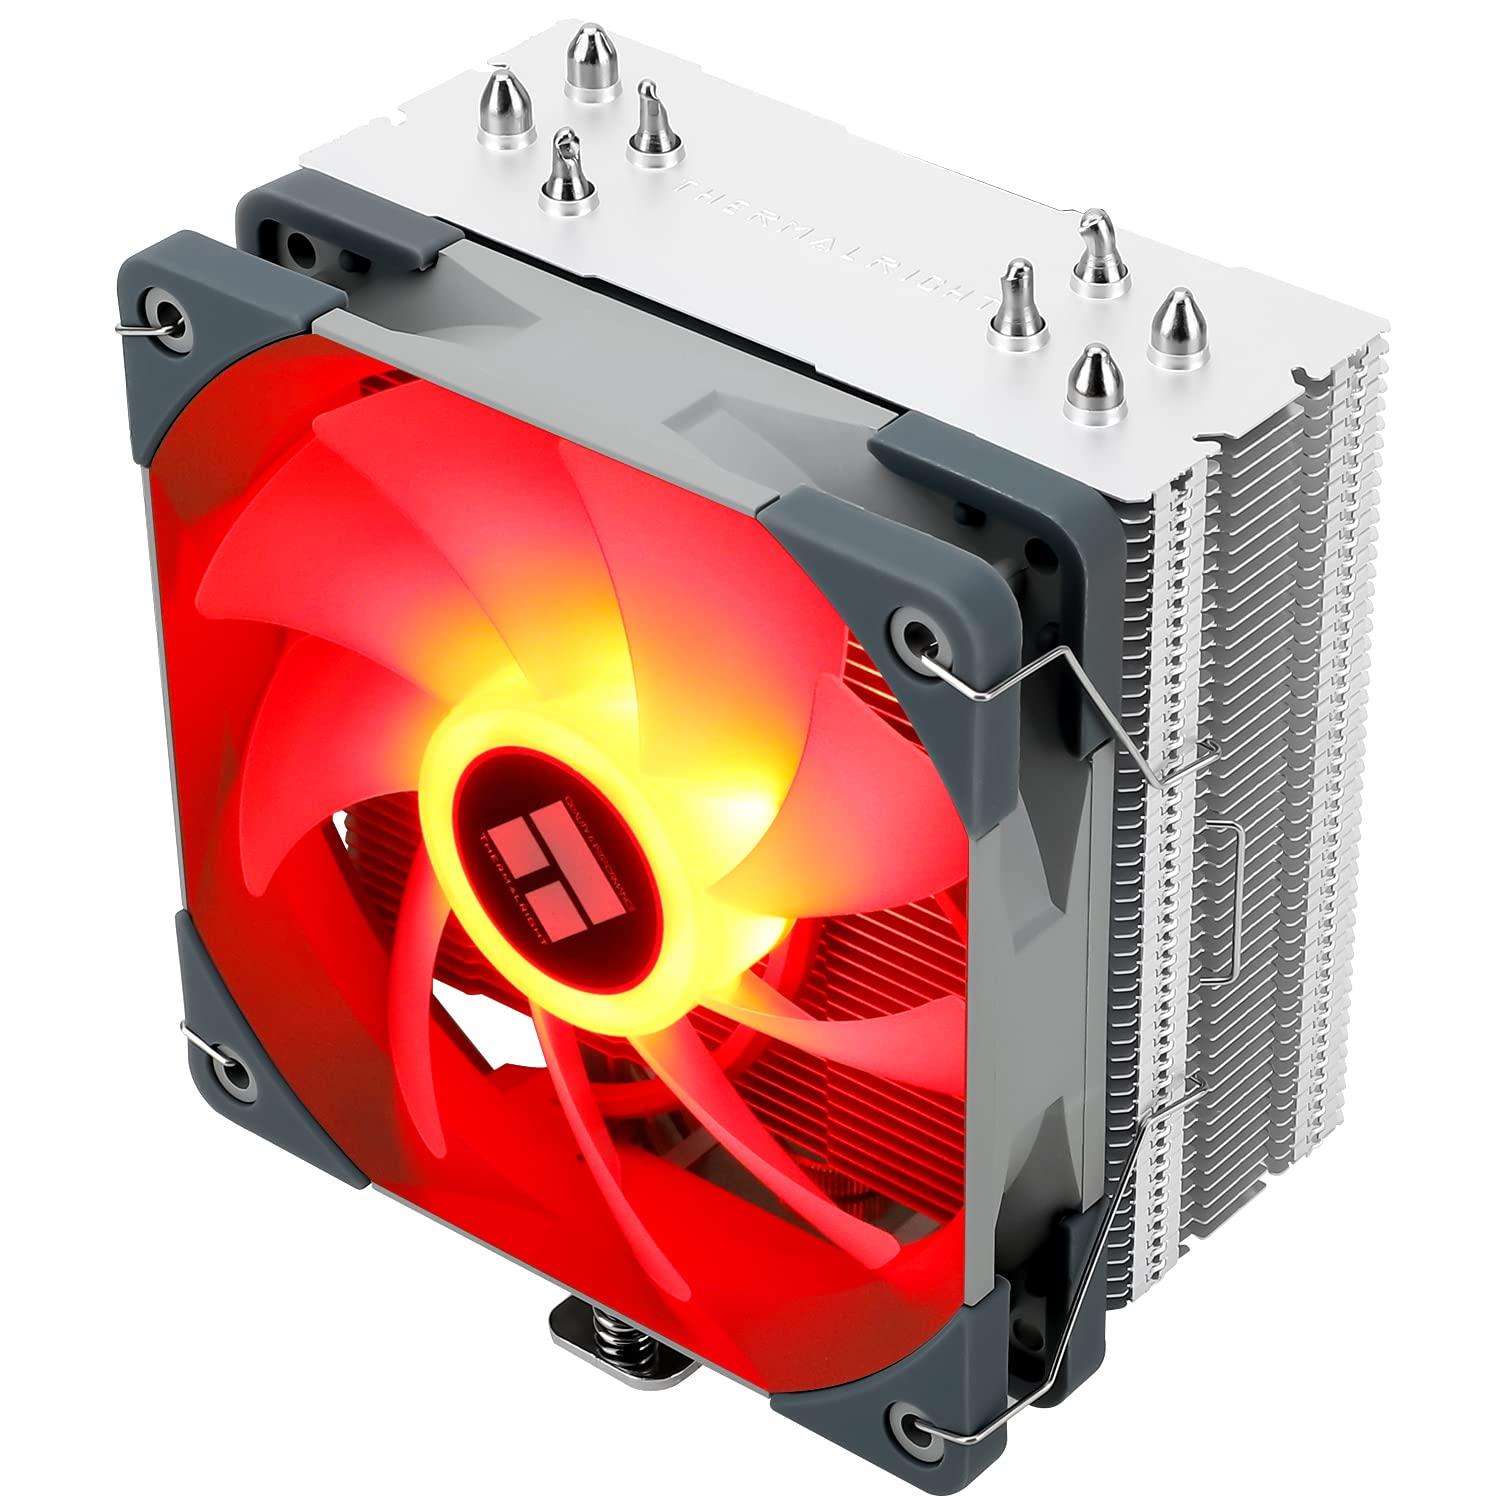 Thermalright Assassin Spirit 120 CPU Air Cooler for $23.65